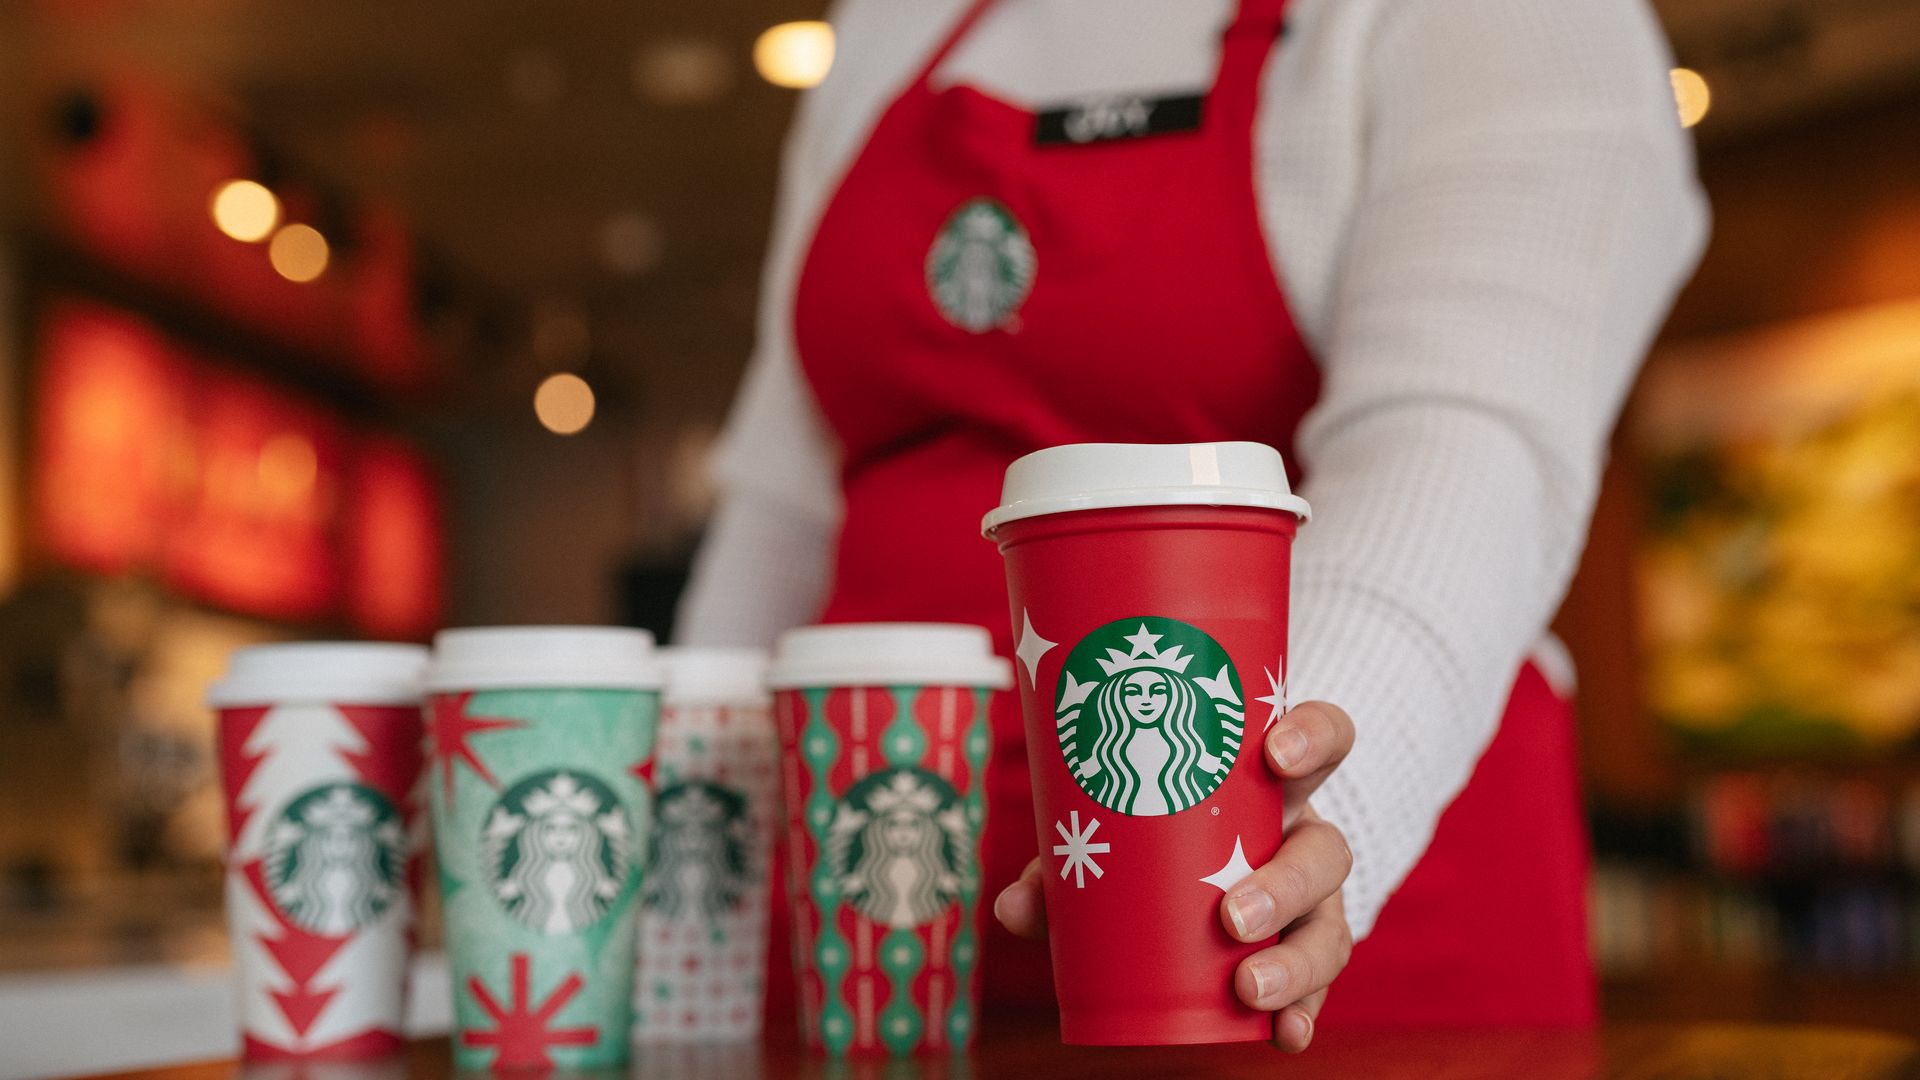 Starbucks barista holds a red reusable cup with other holiday cups nearby